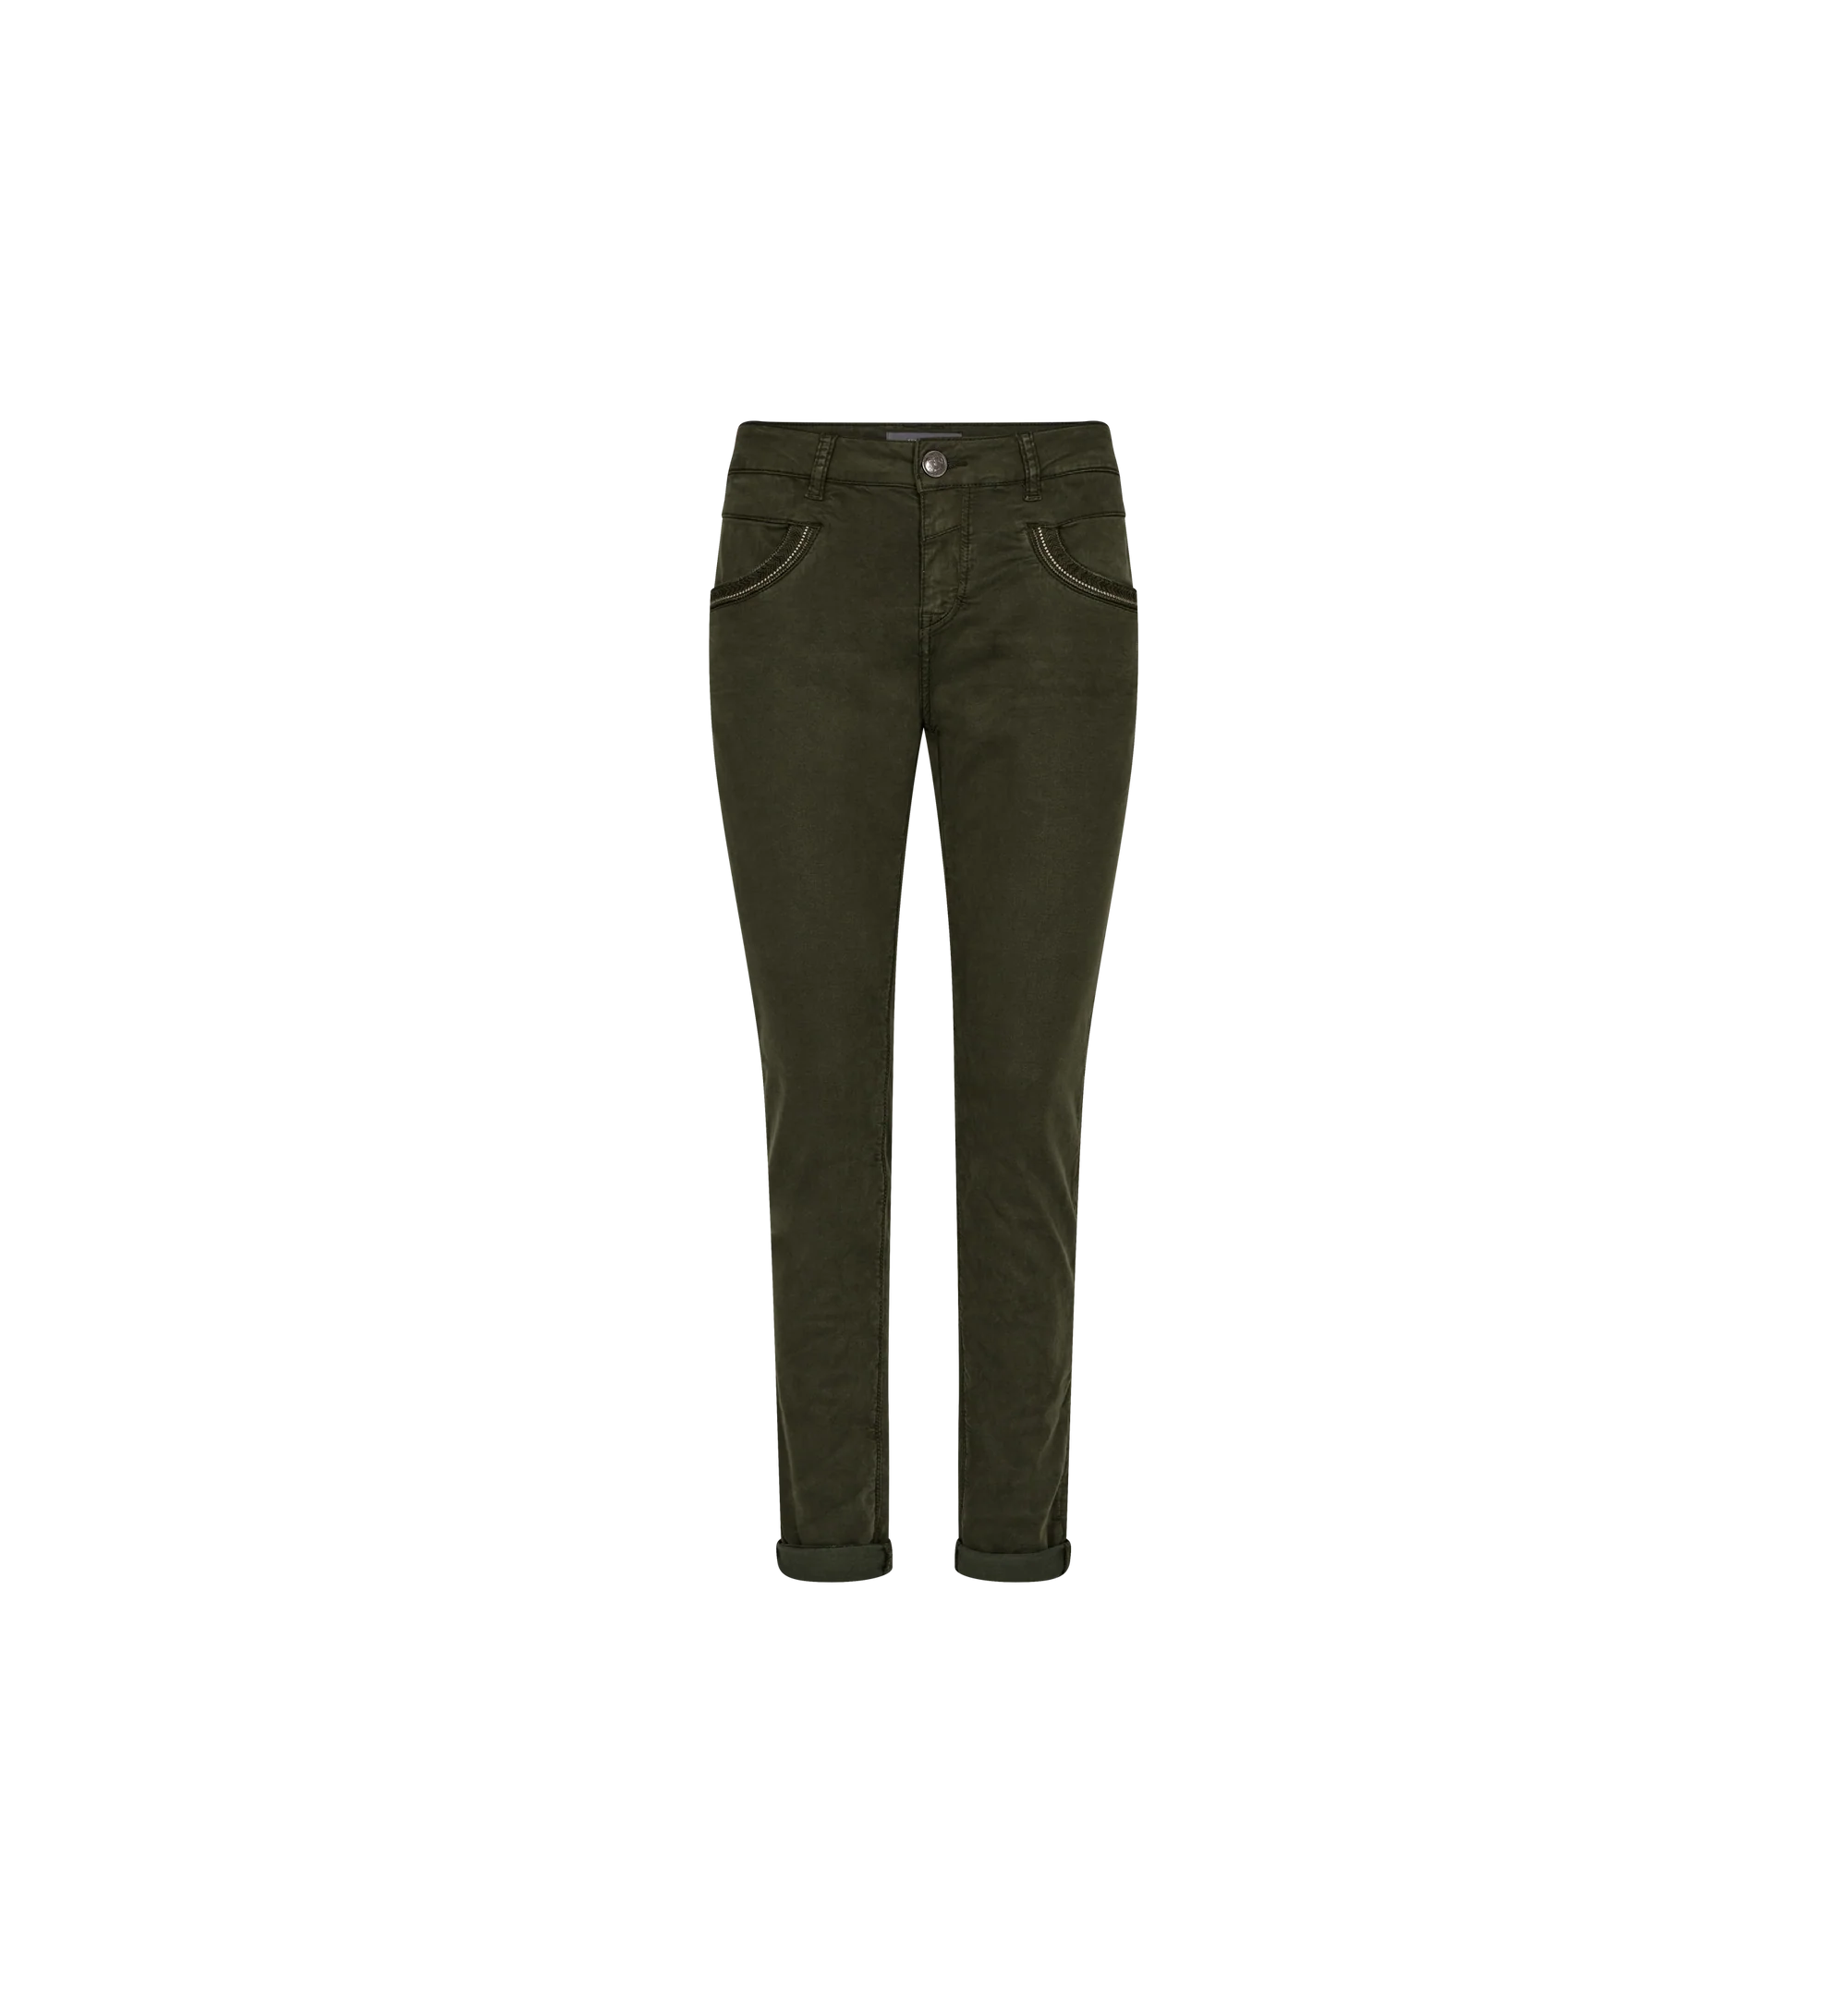 MOS MOSH MMNAOMI TREASURE PANT IN FOREST NIGHT